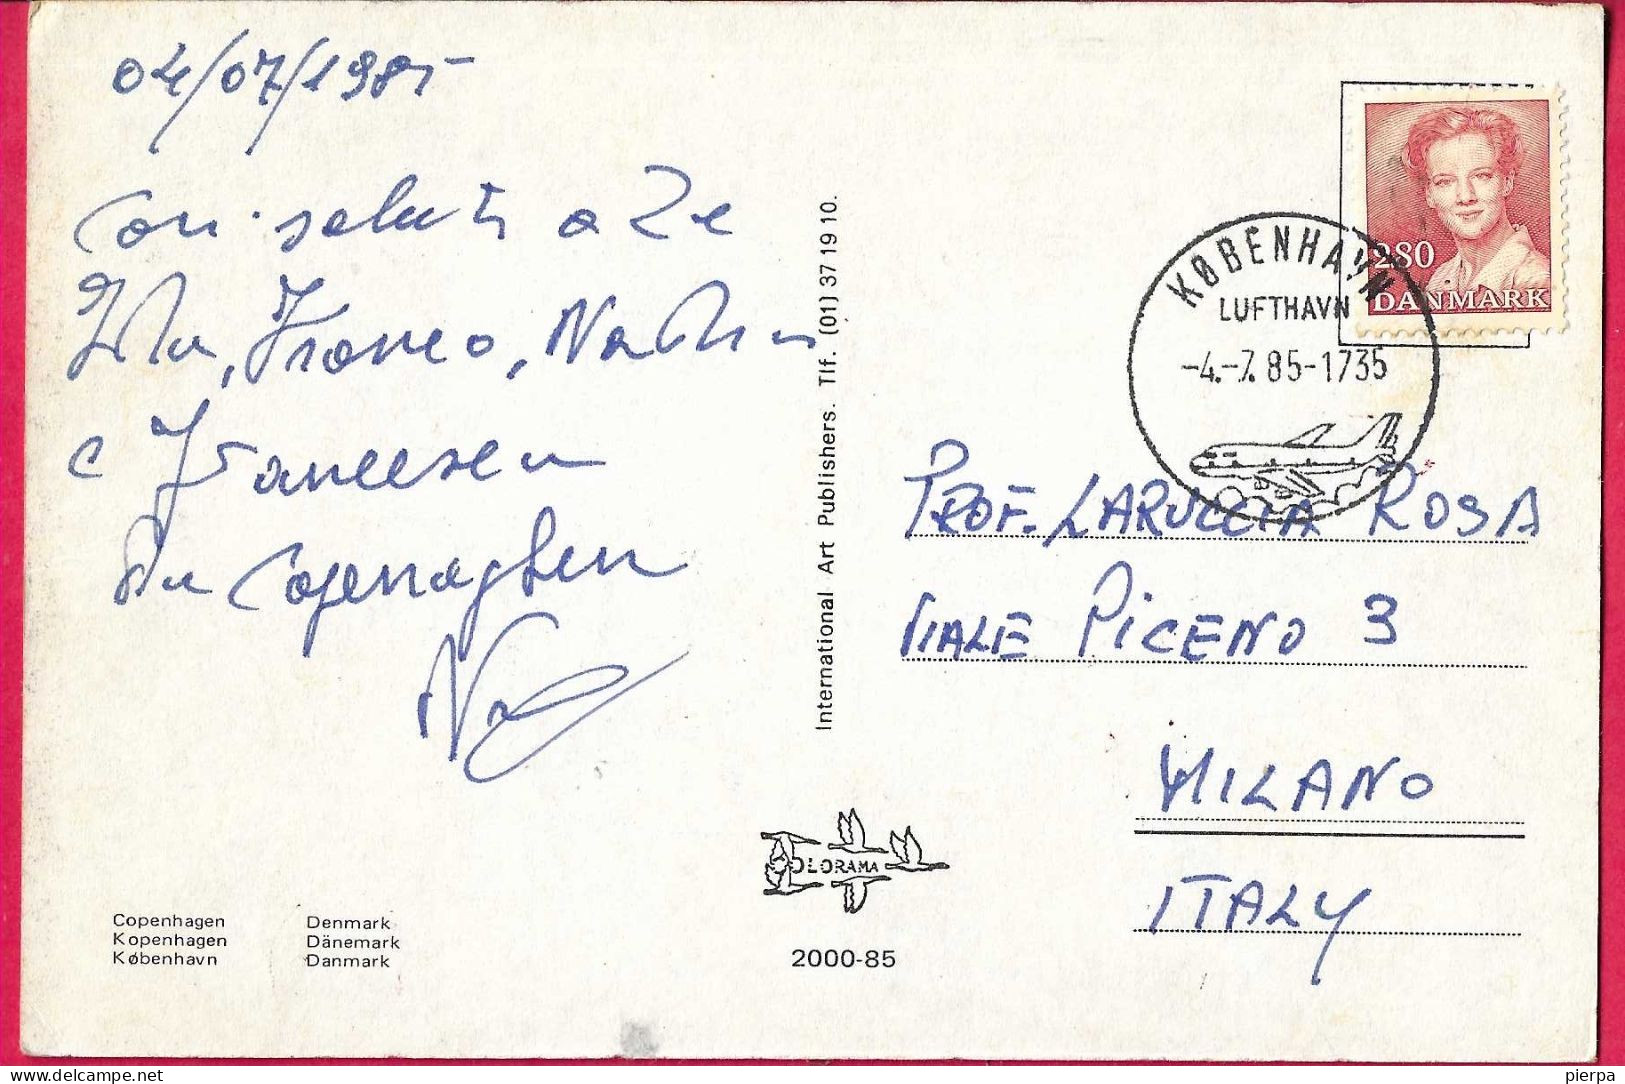 DANMARK - CANCELLATION "KOBENHAVN LUFTHAVN*4.7.85* ON PICTURE CARD FOR ITALY - Covers & Documents